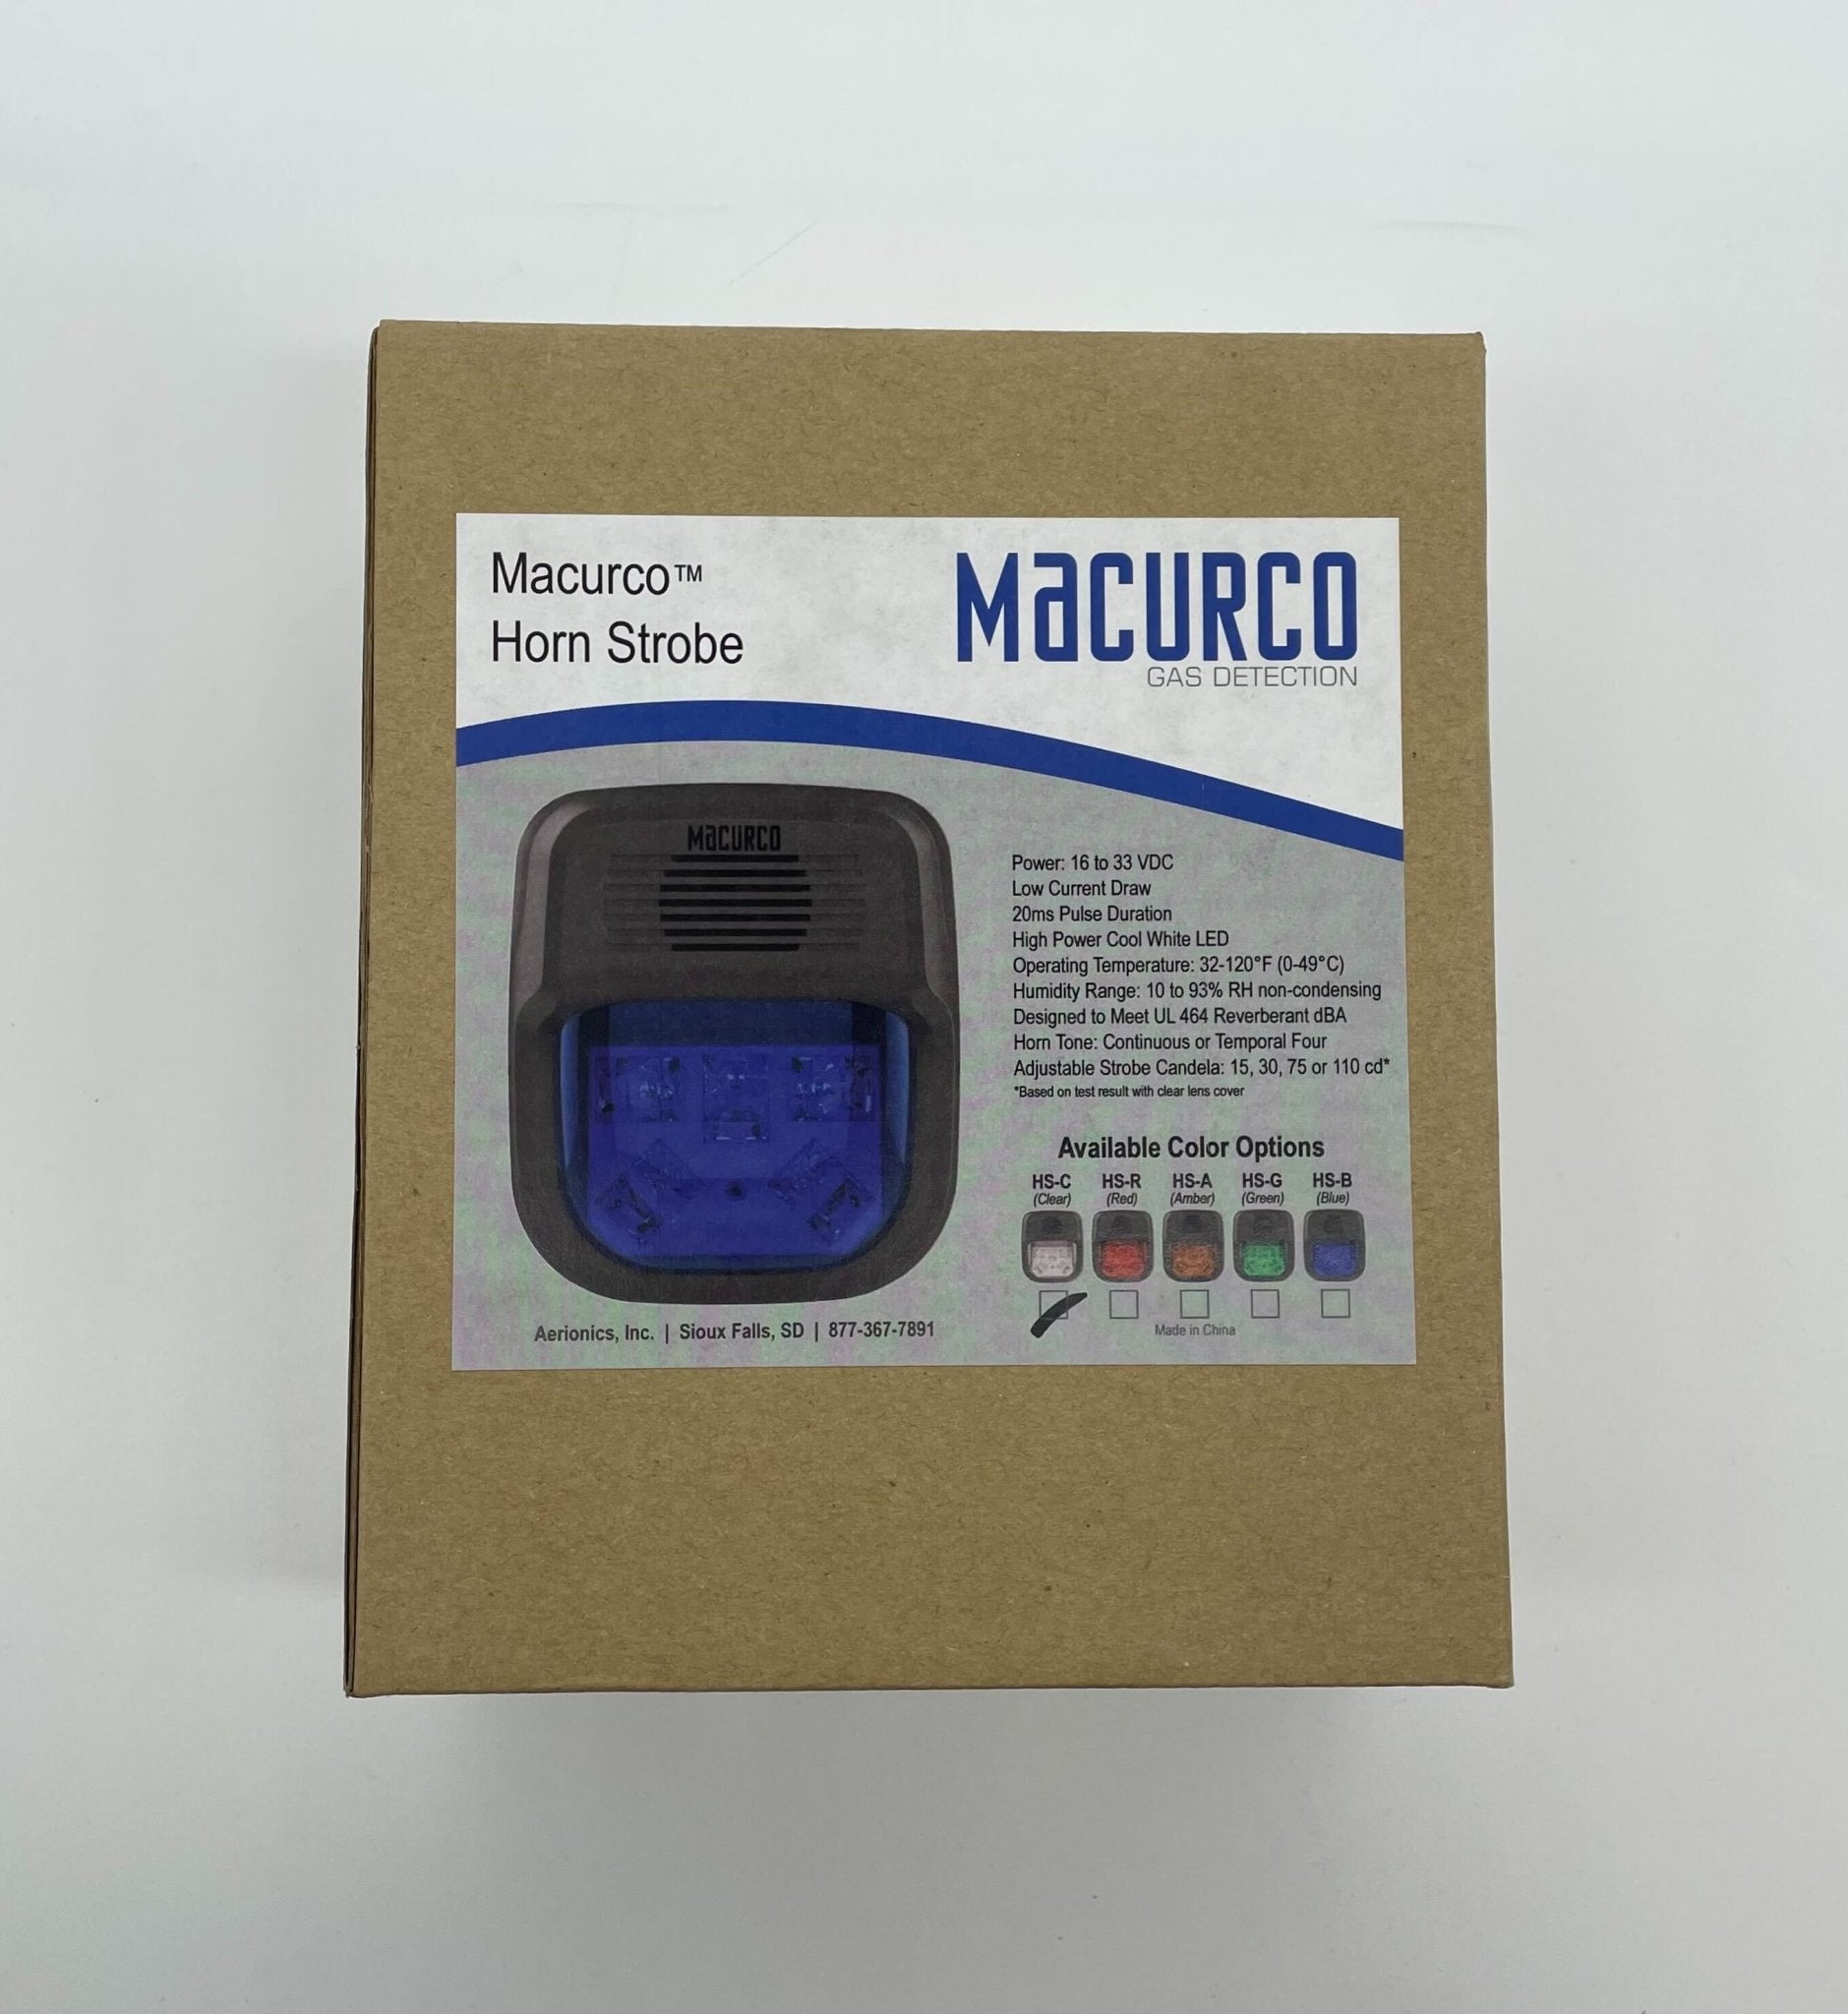 Macurco HS-C Horn Strobe Combo - The Fire Alarm Supplier